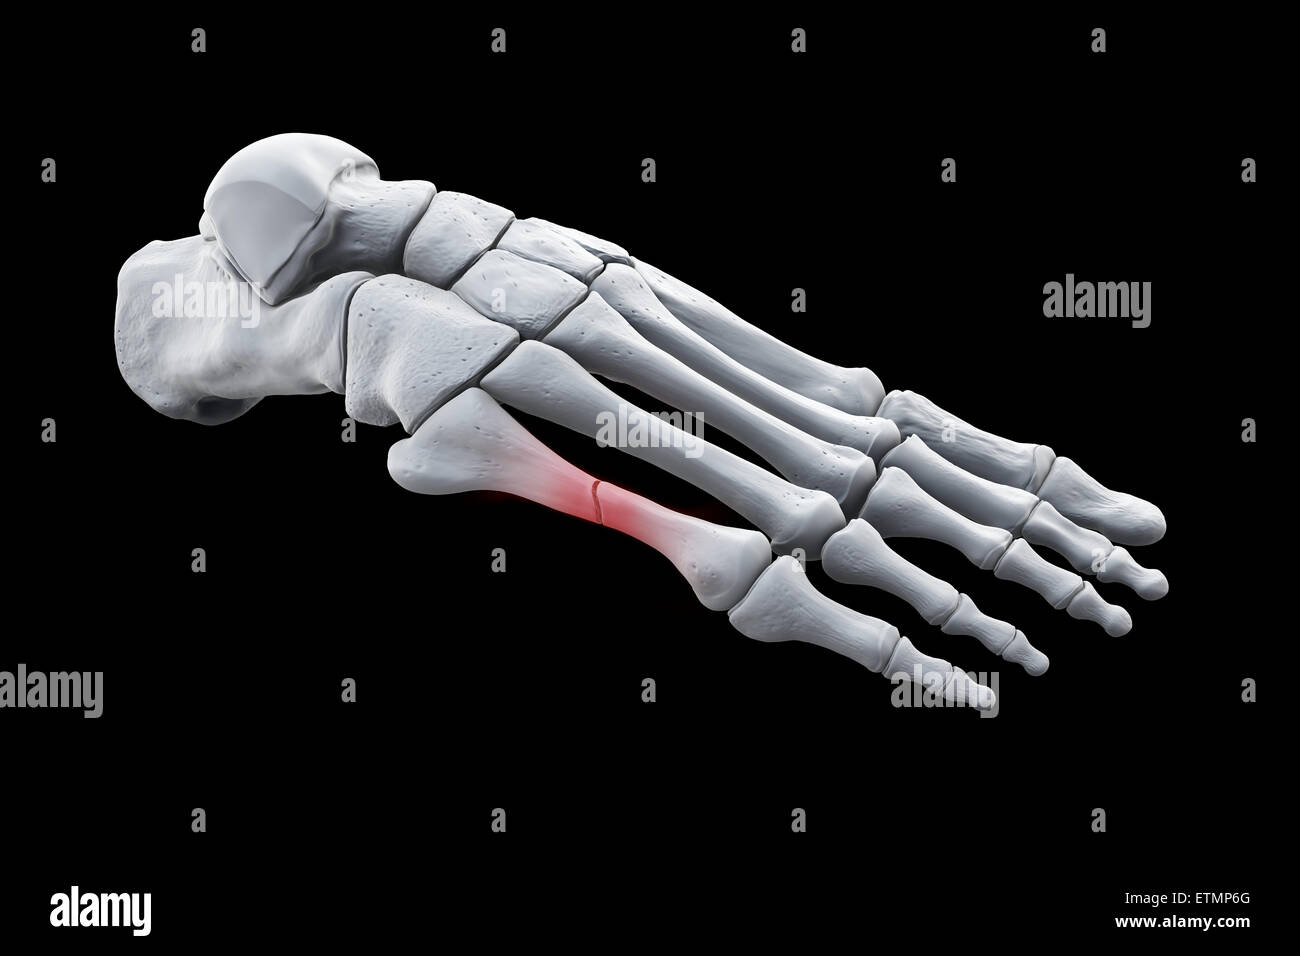 Illustration showing the bones of the foot with a break in a metatarsal highlighted. Stock Photo